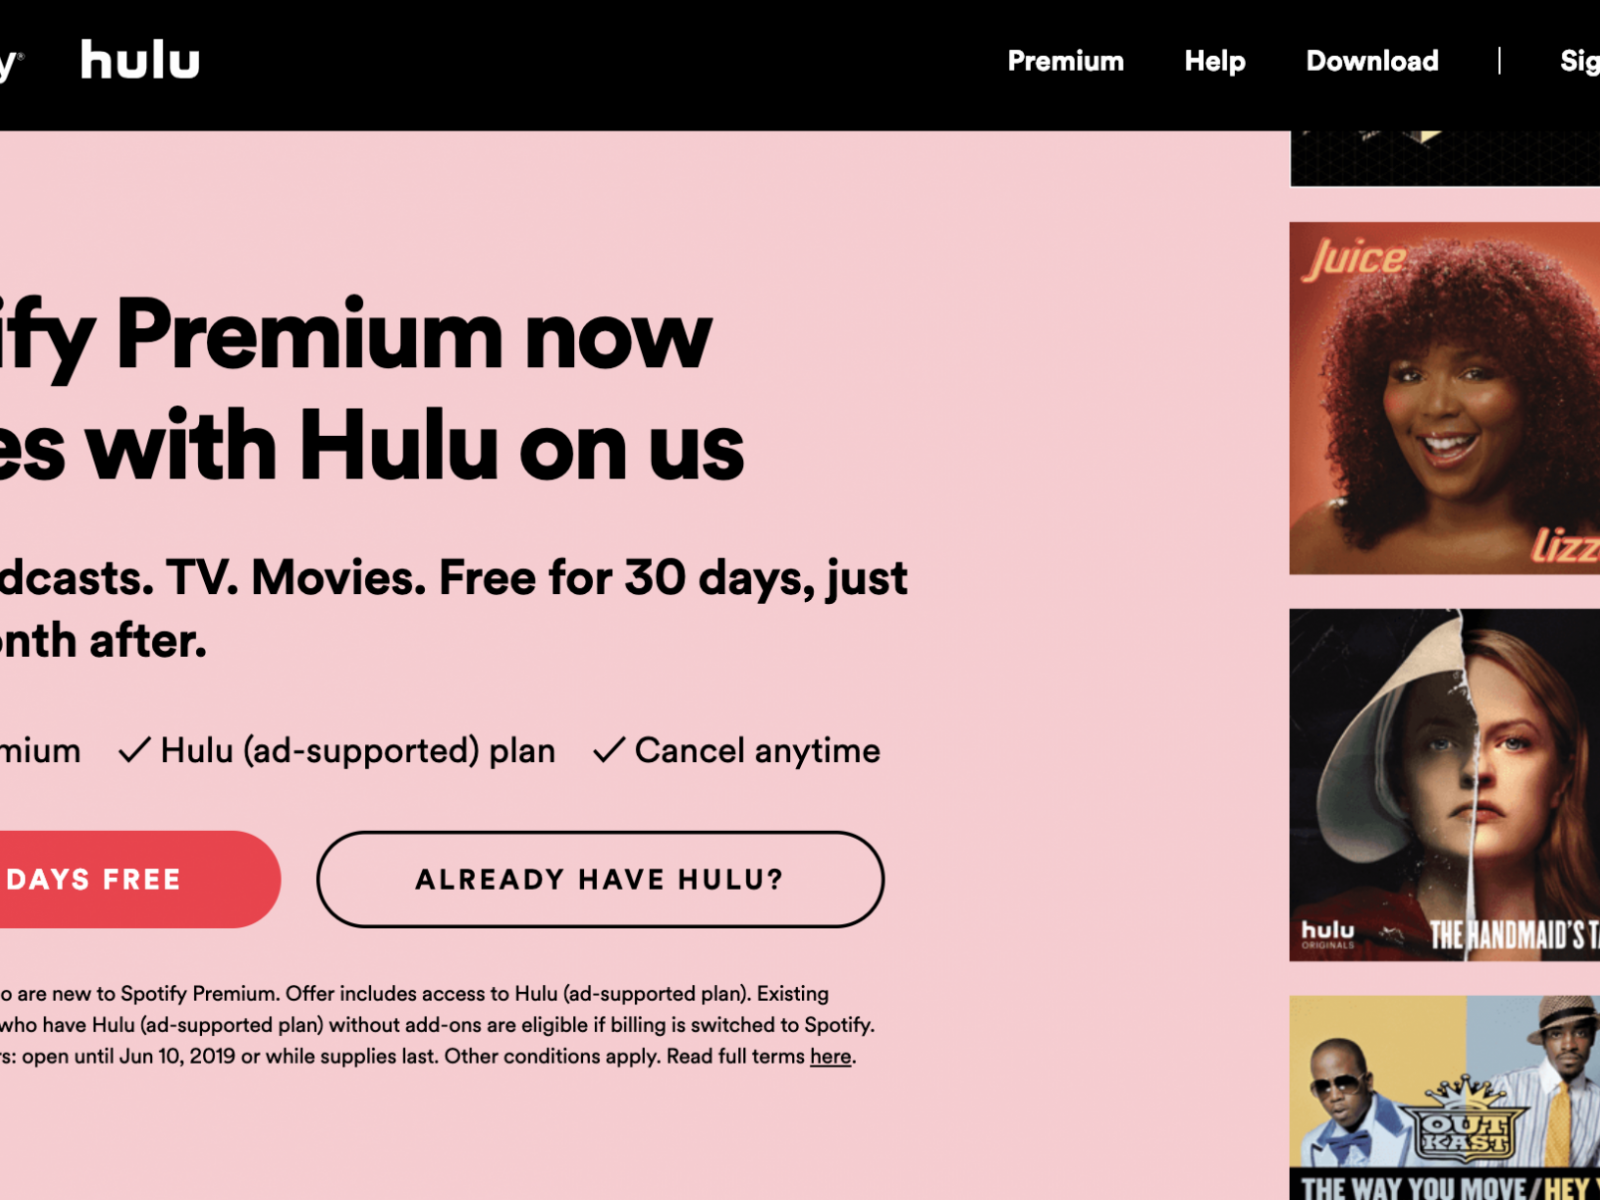 Do you get spotify premium free with hulu without